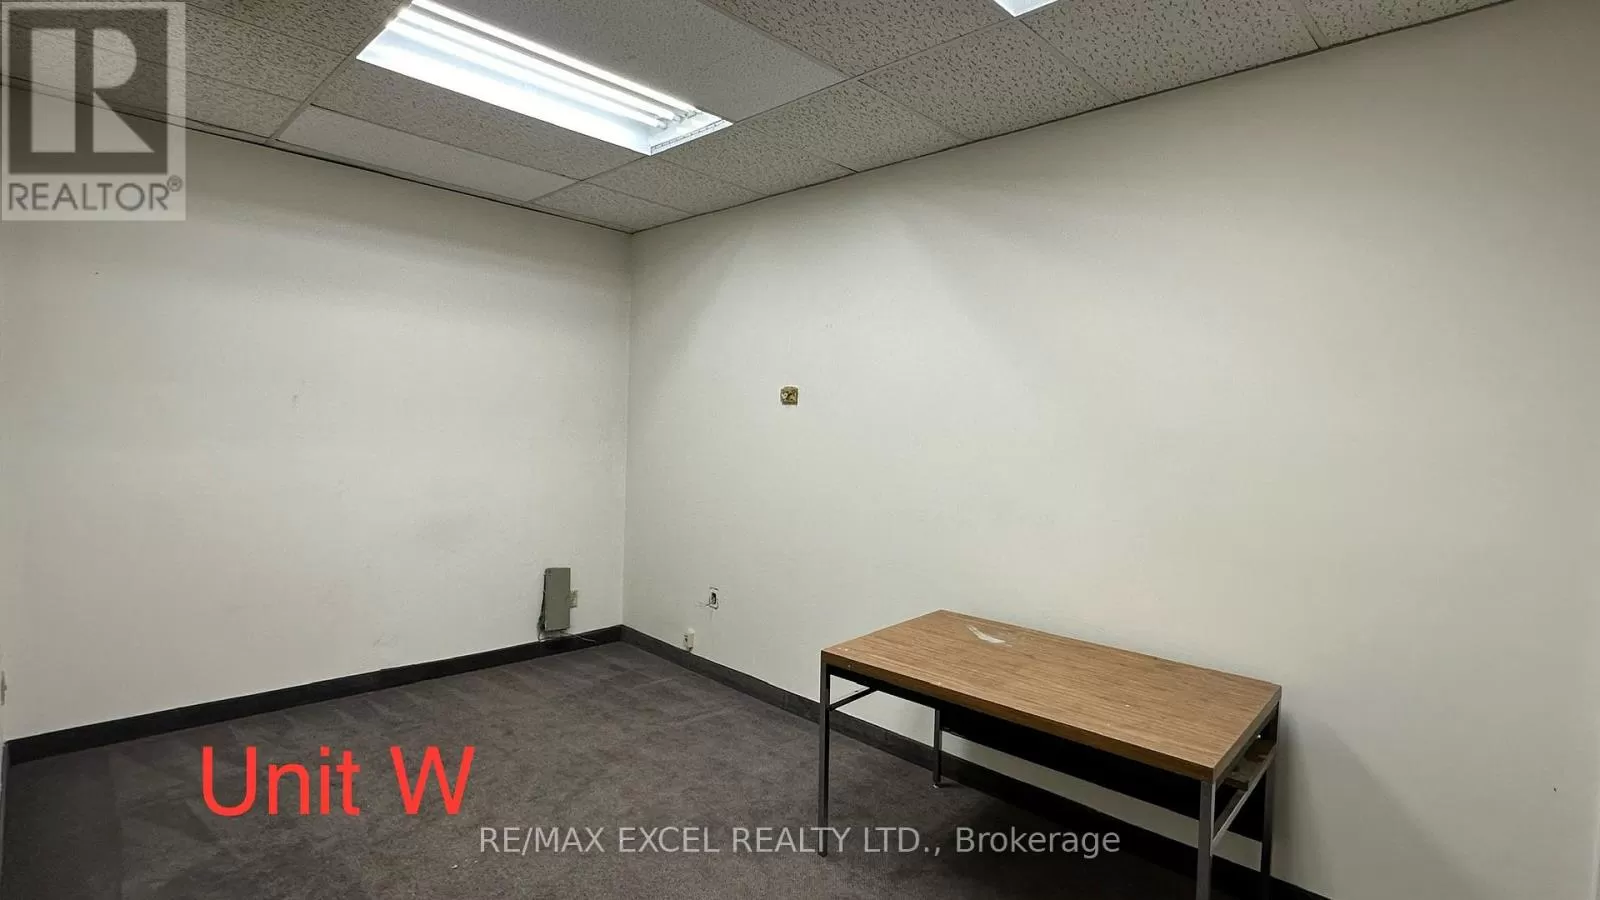 Offices for rent: 230w - 55 Nugget Avenue, Toronto, Ontario M1S 3L1